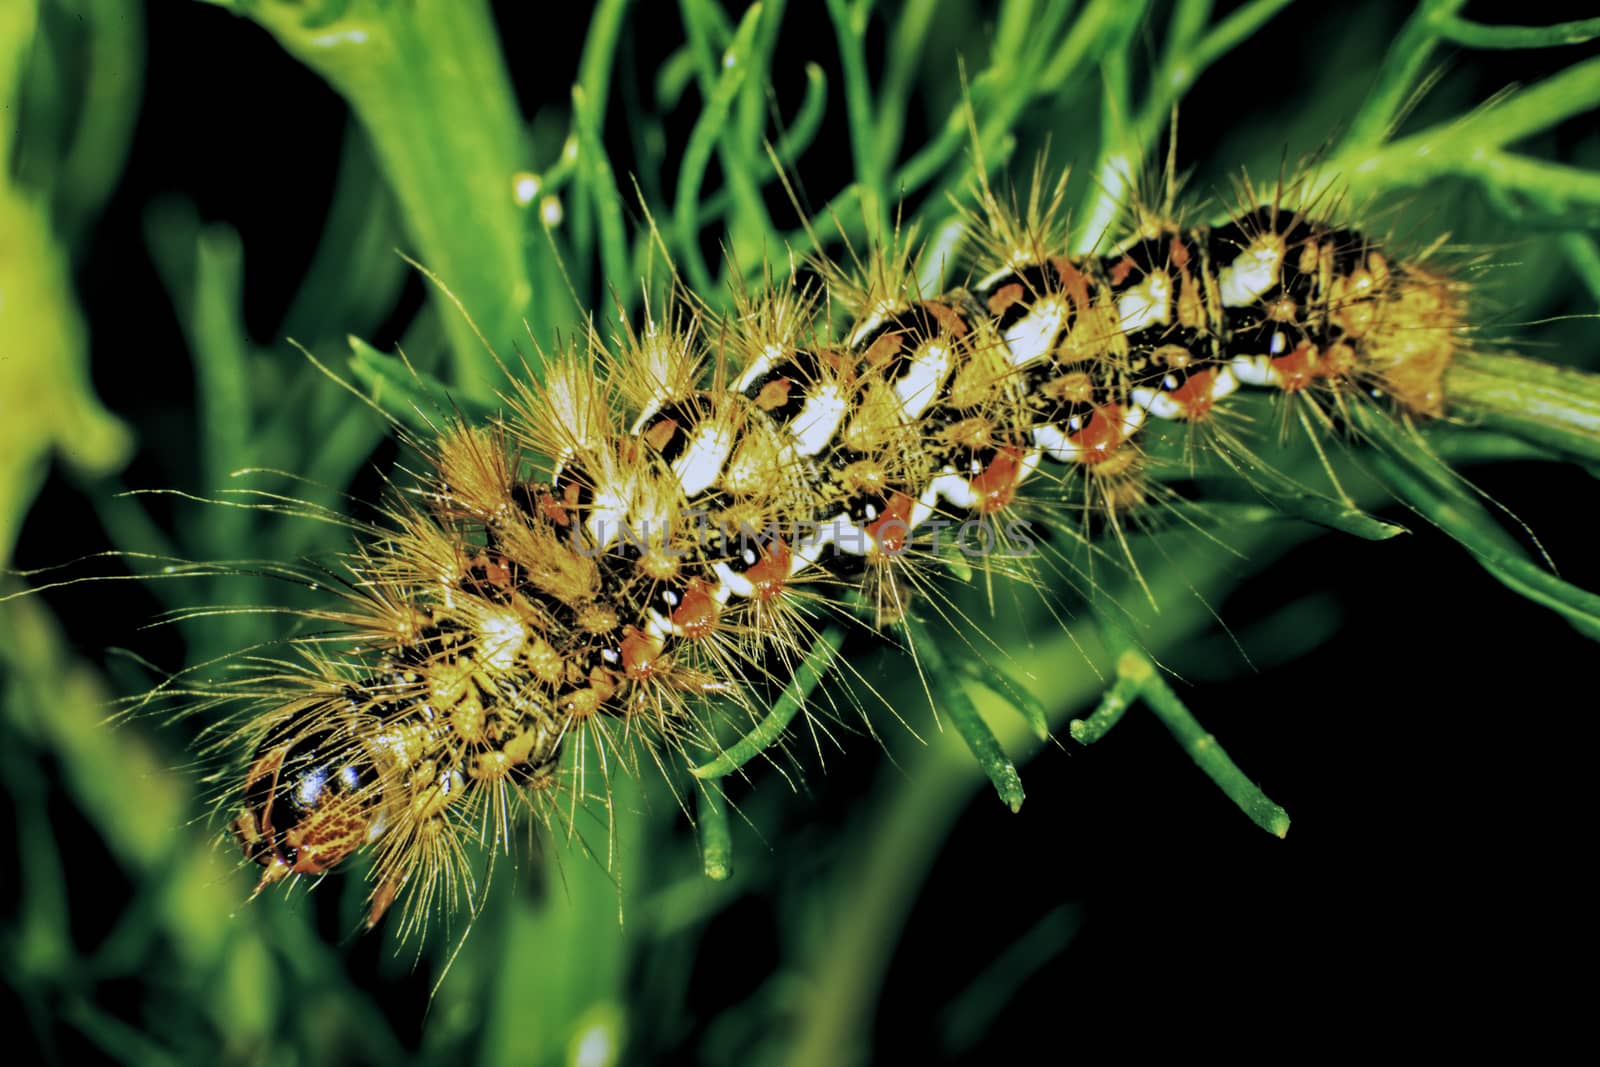 Larva stage of the Red dagger moth